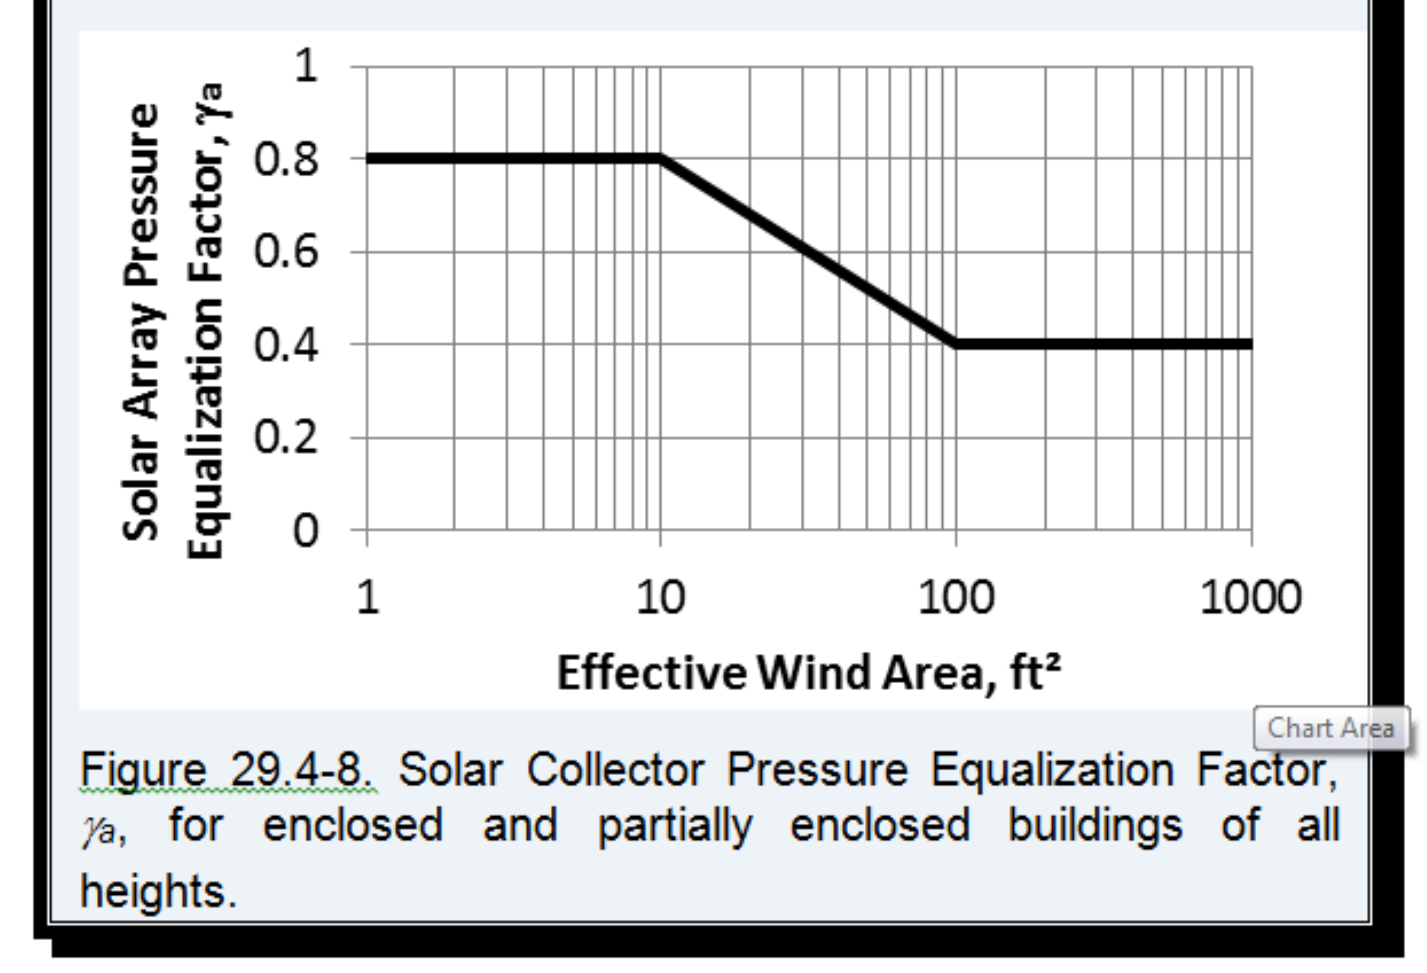 Wind Area Calculations from SEIA Graphic